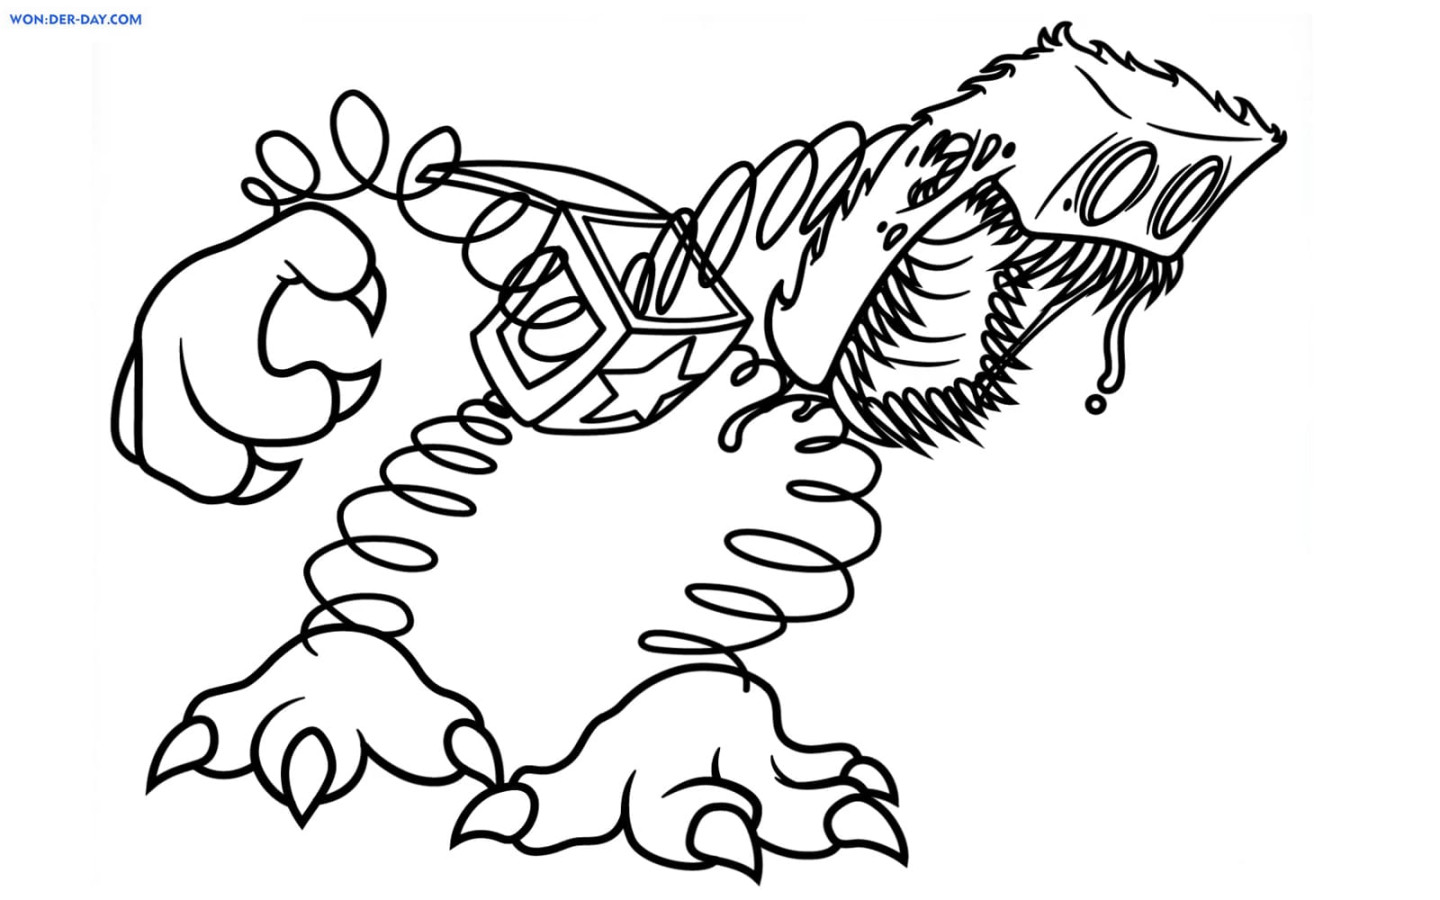 Boxy Boo Coloring Pages  WONDER DAY — Coloring pages for children